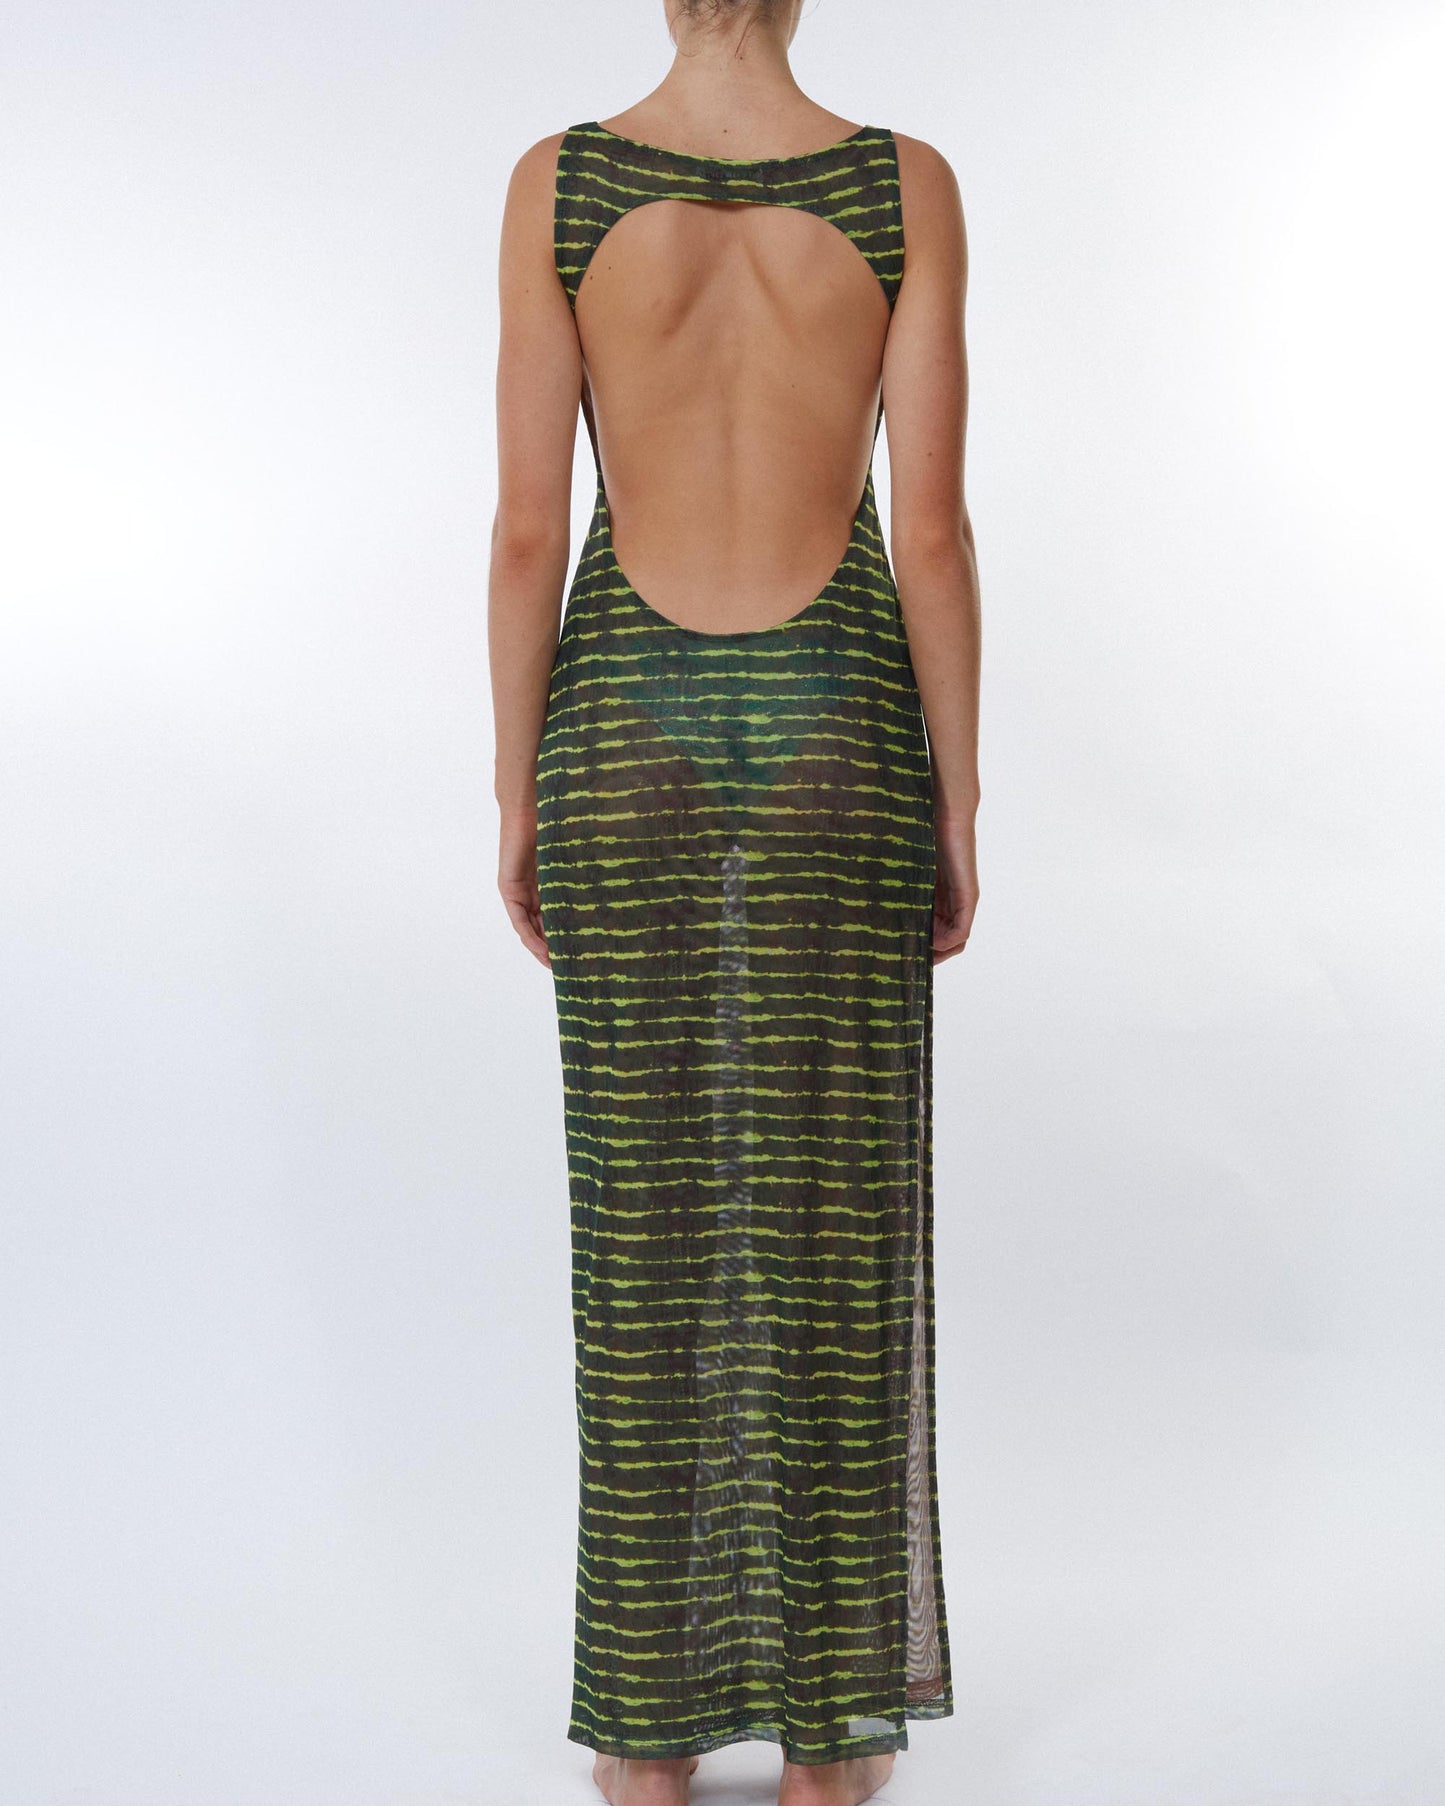 THE BACKLESS MAXI - COCOMOCO